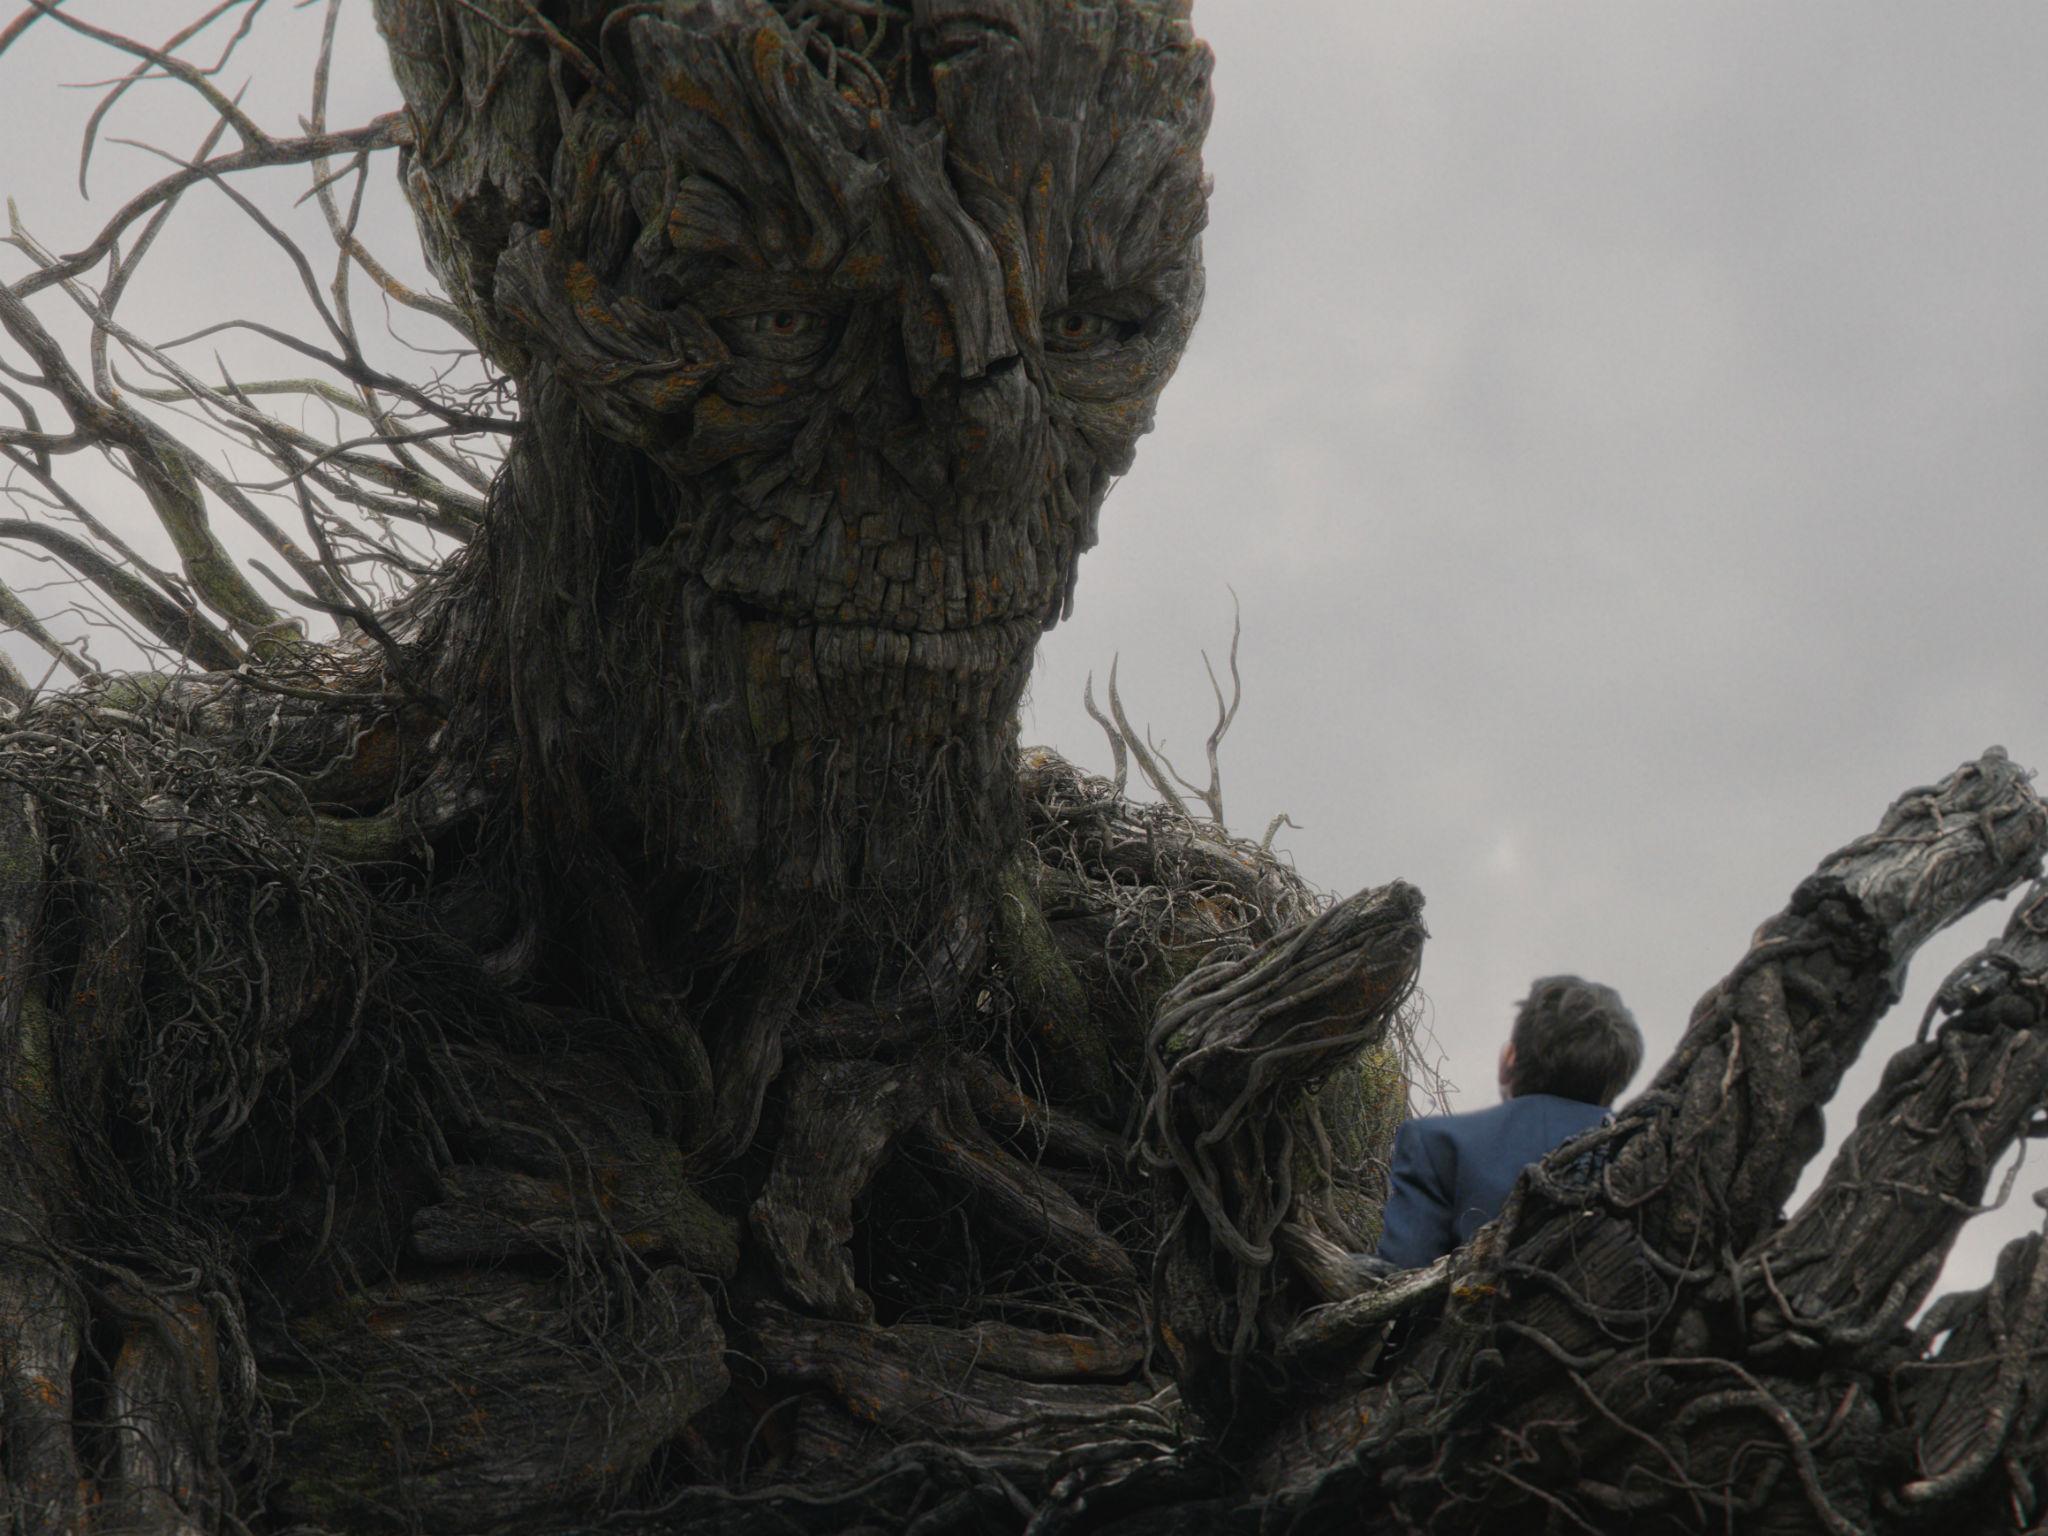 A scene from A Monster Calls